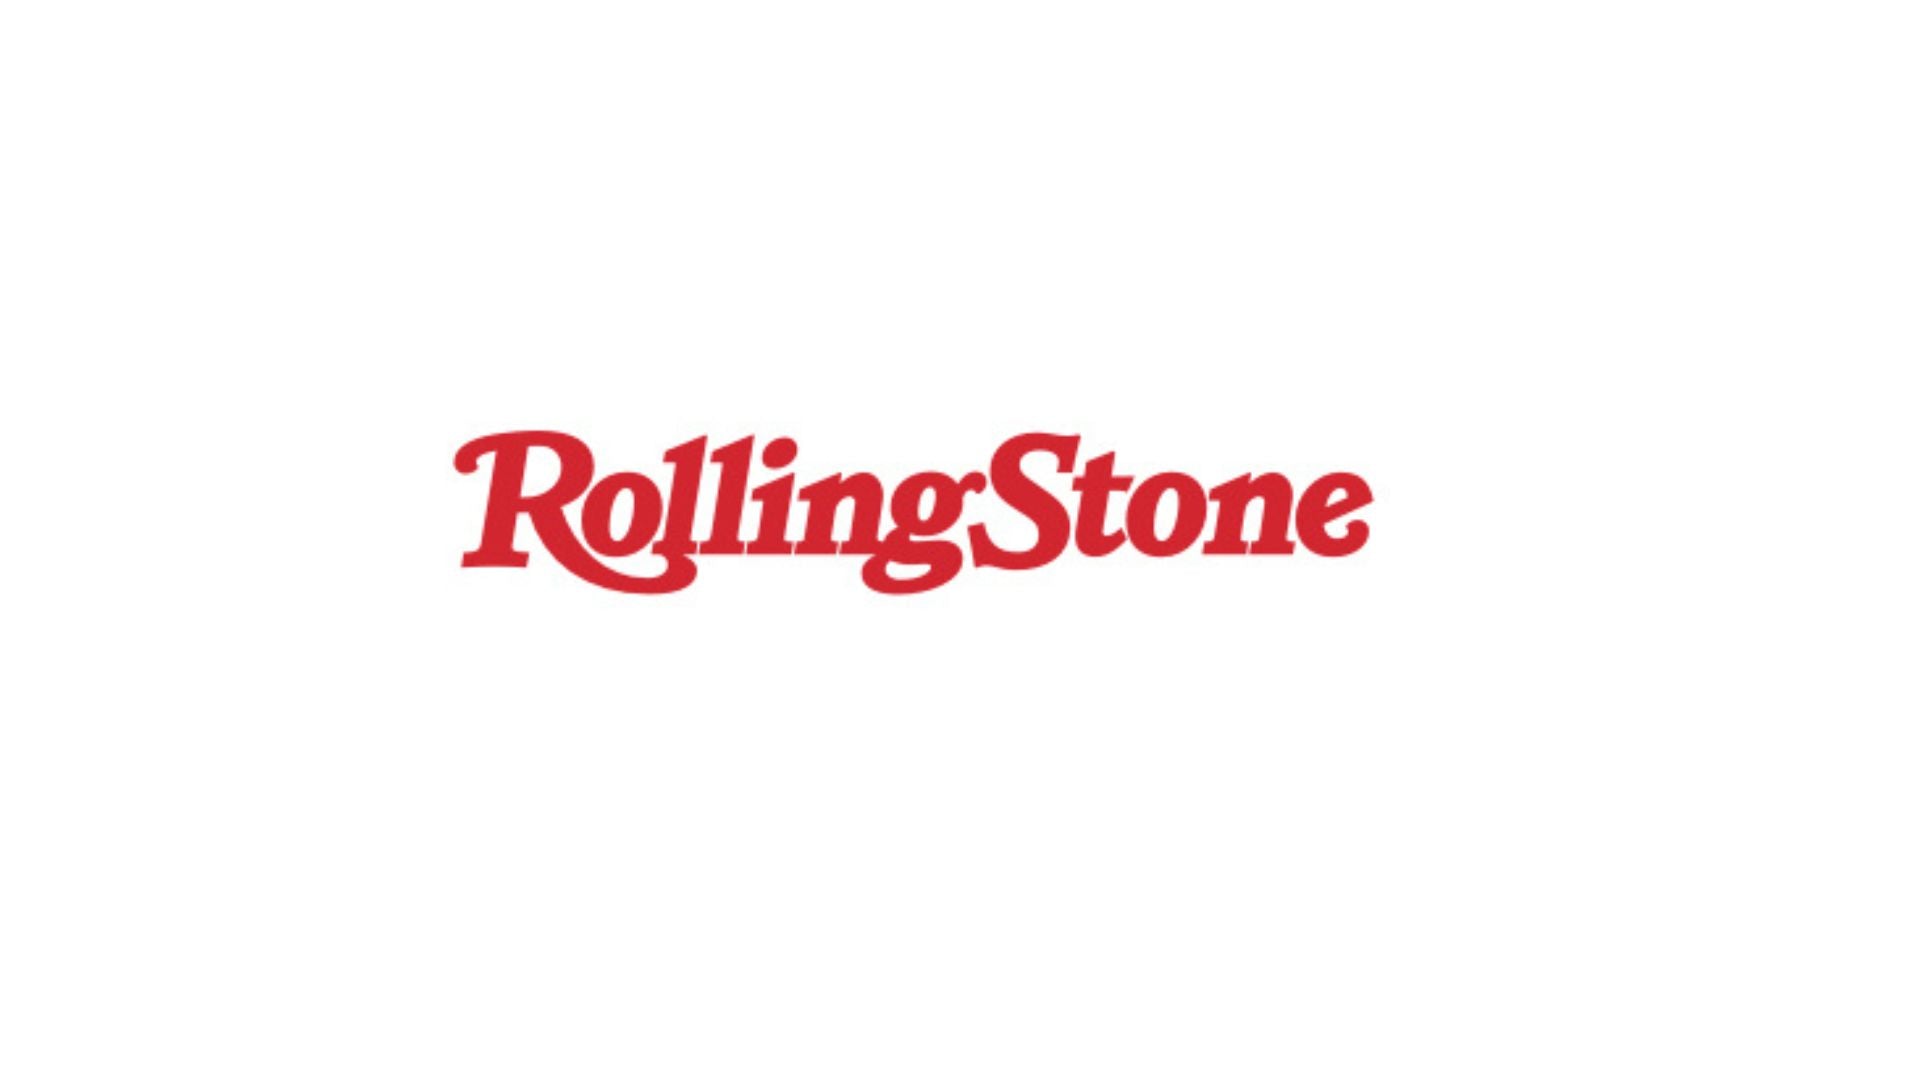 Rolling Stone Cannabis Gift Guide: Weed, Cannabis, Pot Gifts for Everyone